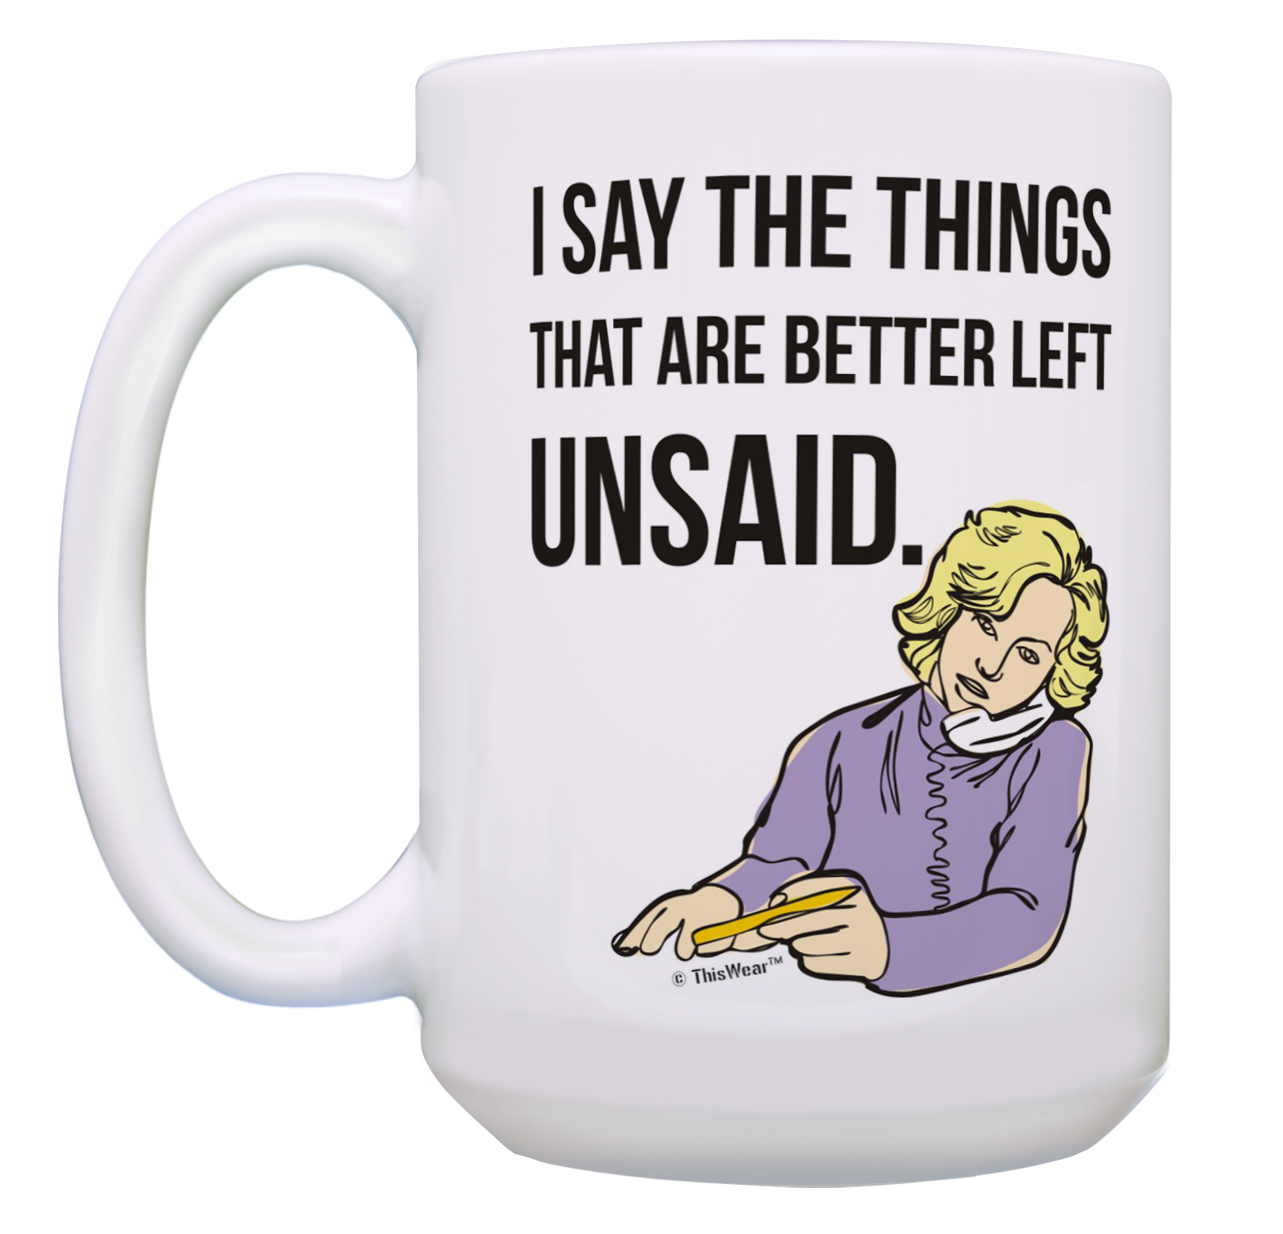 ThisWear Humor Coffee Mug I Say the Things That Are Better Left Unsaid Funny Coffee Mugs Sarcasm Cup Funny Coffee Cups for Women and Men Gift 15oz Coffee Mug - image 2 of 4